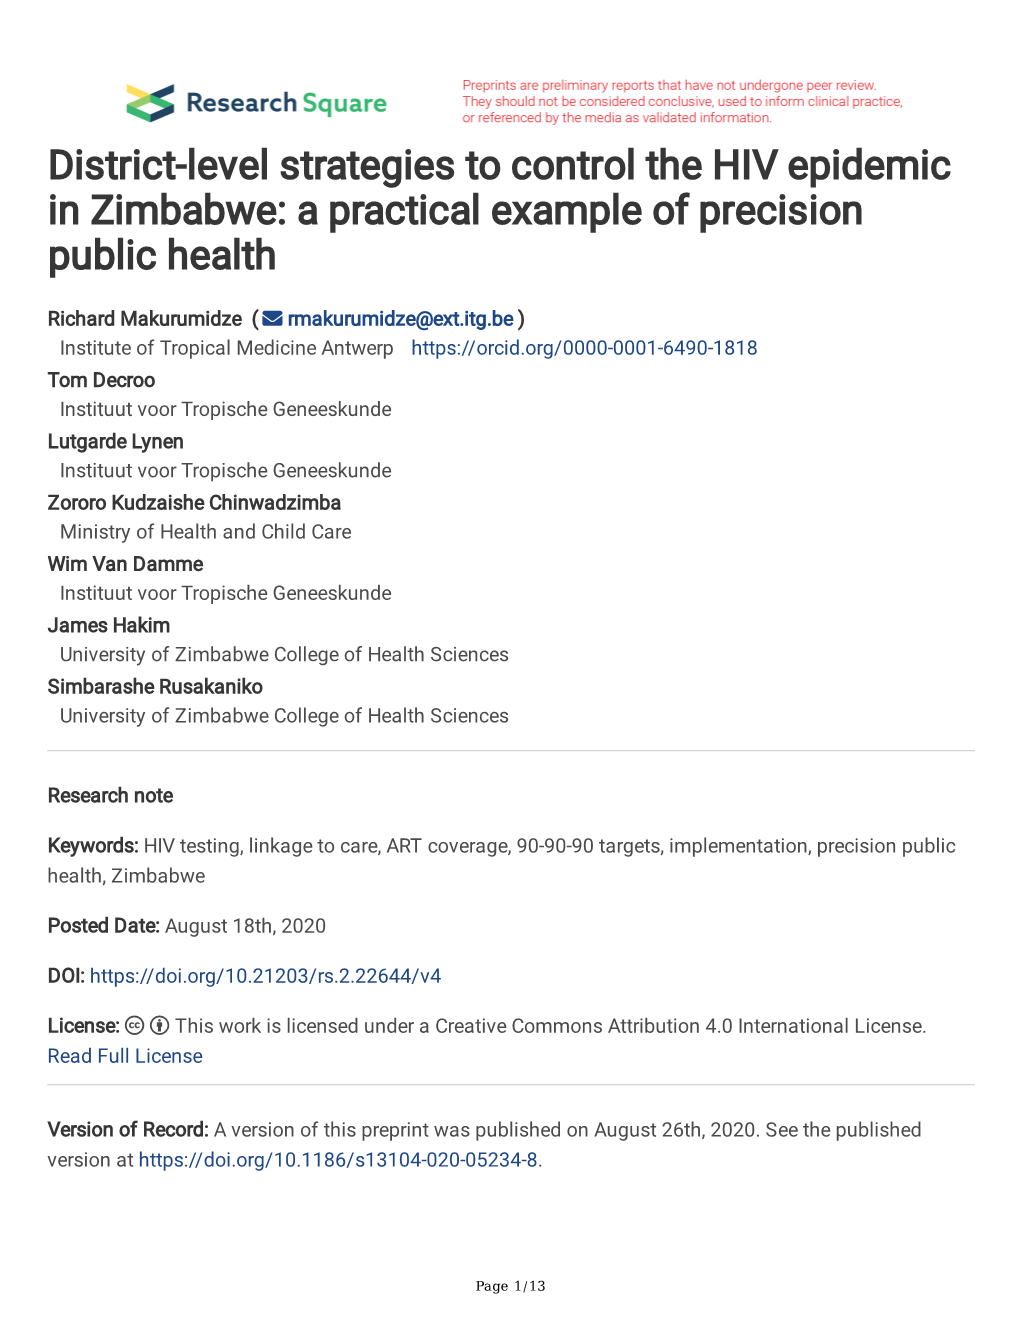 District-Level Strategies to Control the HIV Epidemic in Zimbabwe: a Practical Example of Precision Public Health